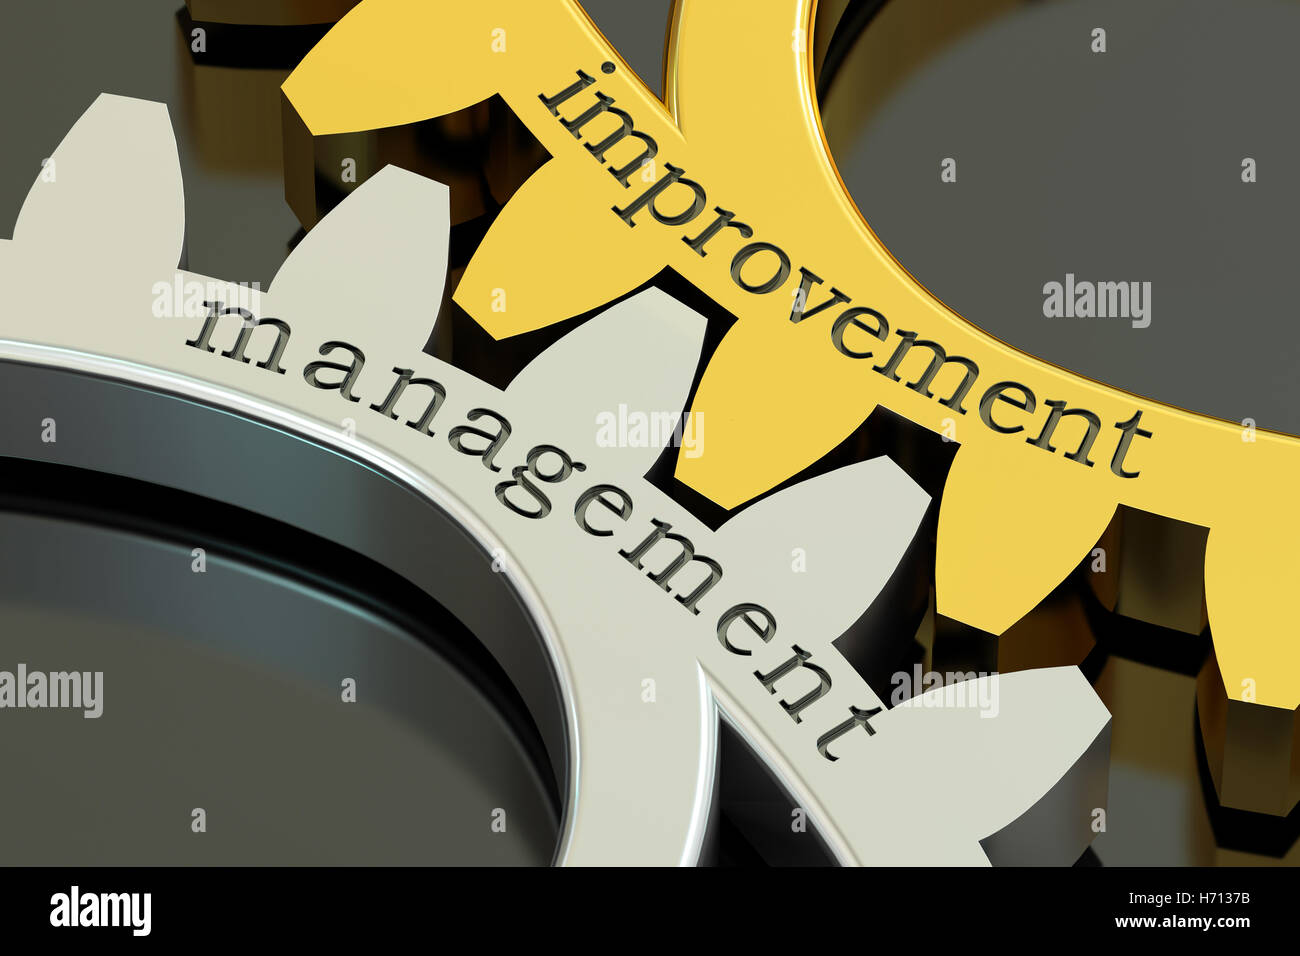 Improvement Management concept on the gearwheels, 3D rendering Stock Photo